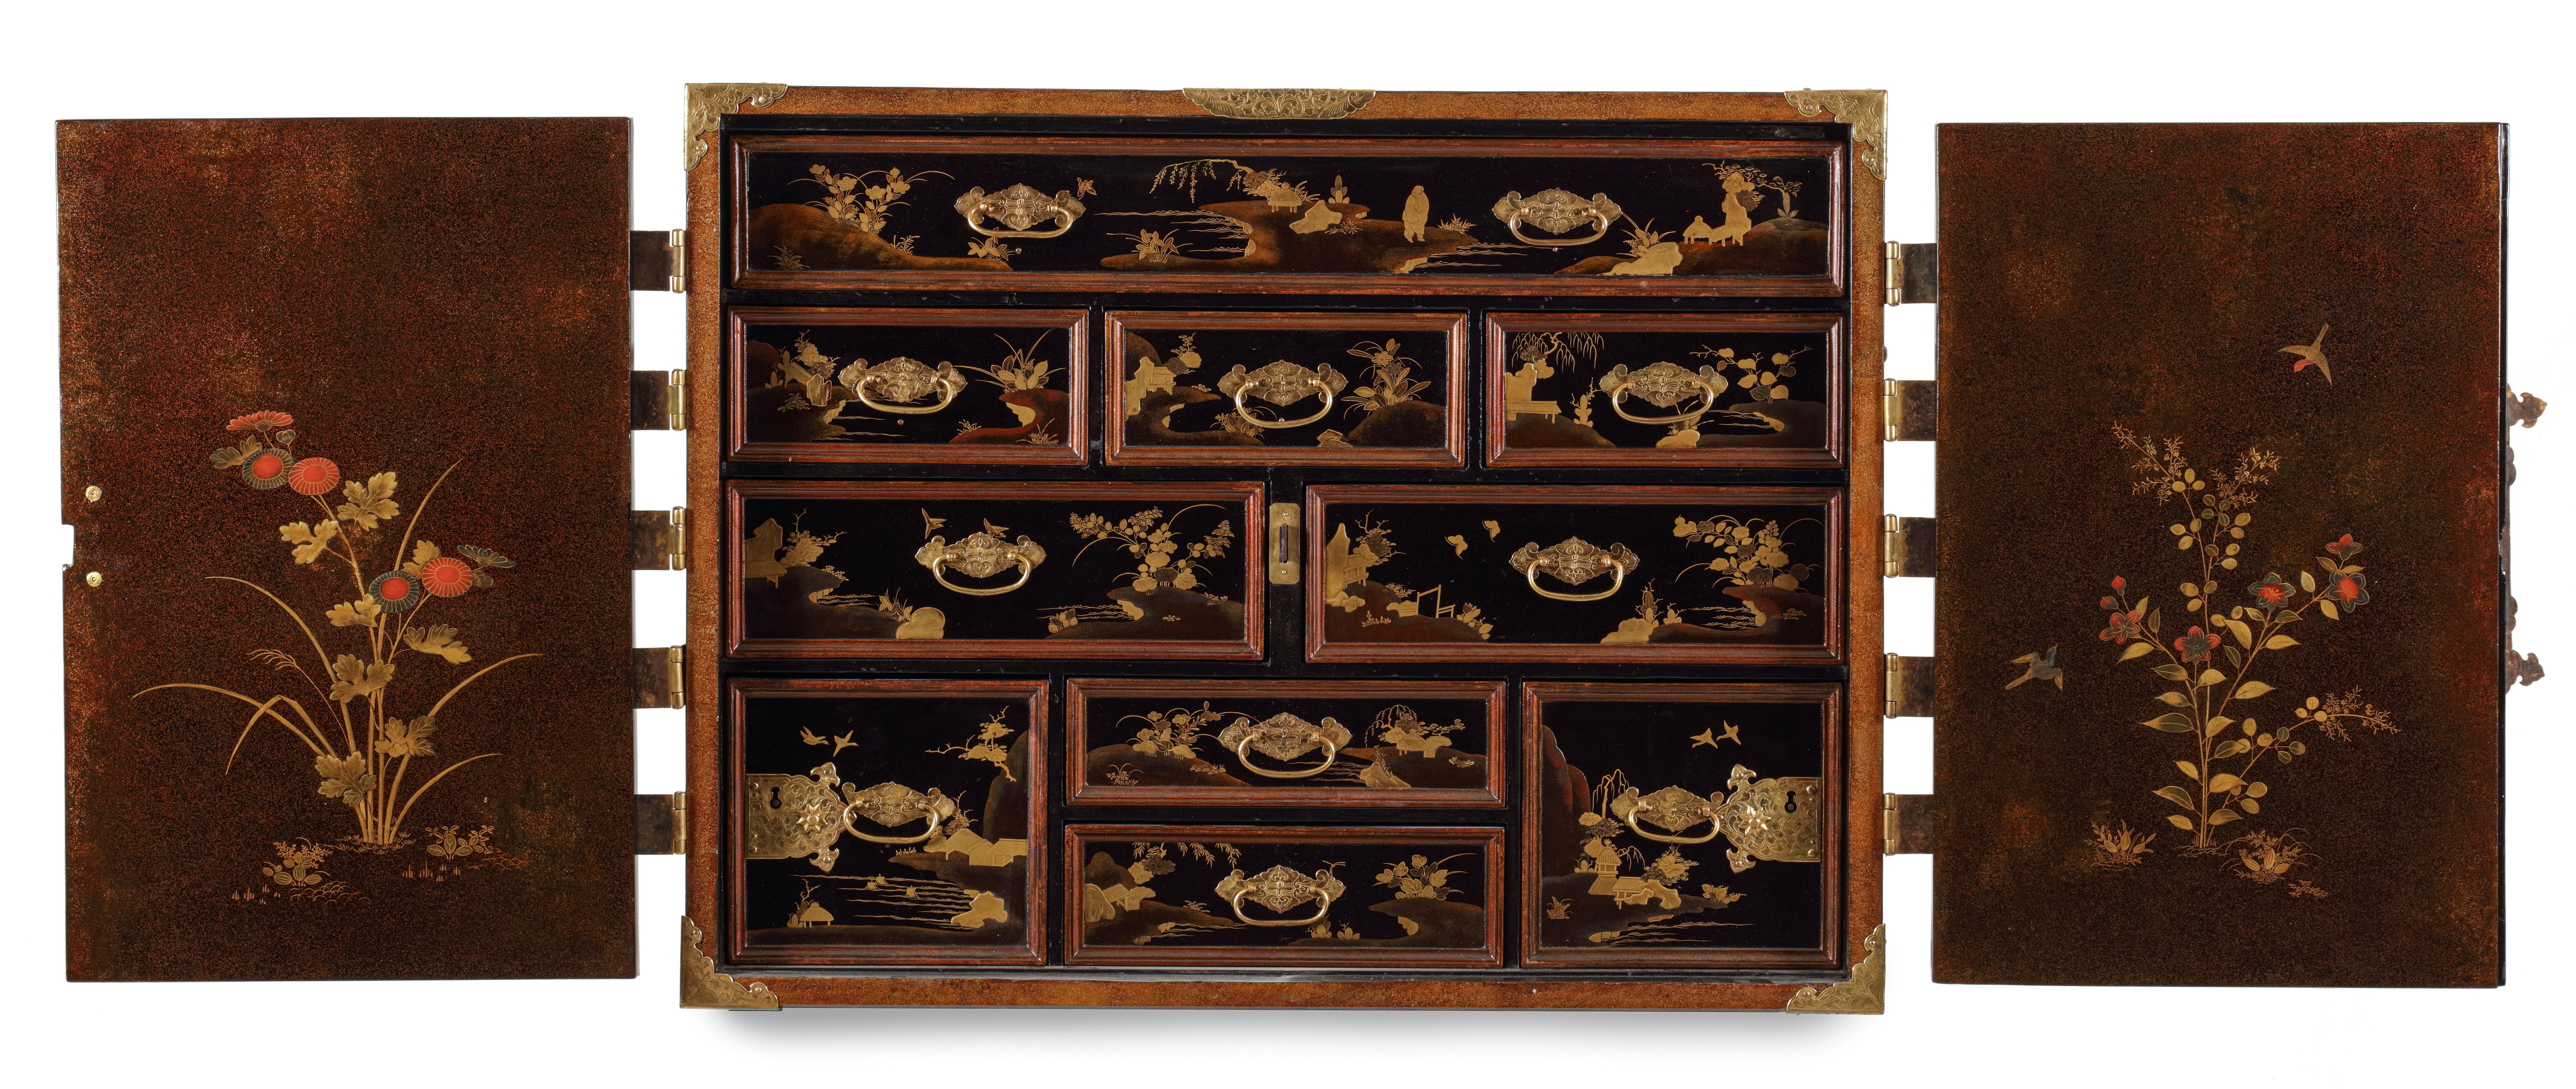 Gilt Extremely Fine and Rare 17th-Century Japanese Export Lacquer and Inlaid Cabinet  For Sale